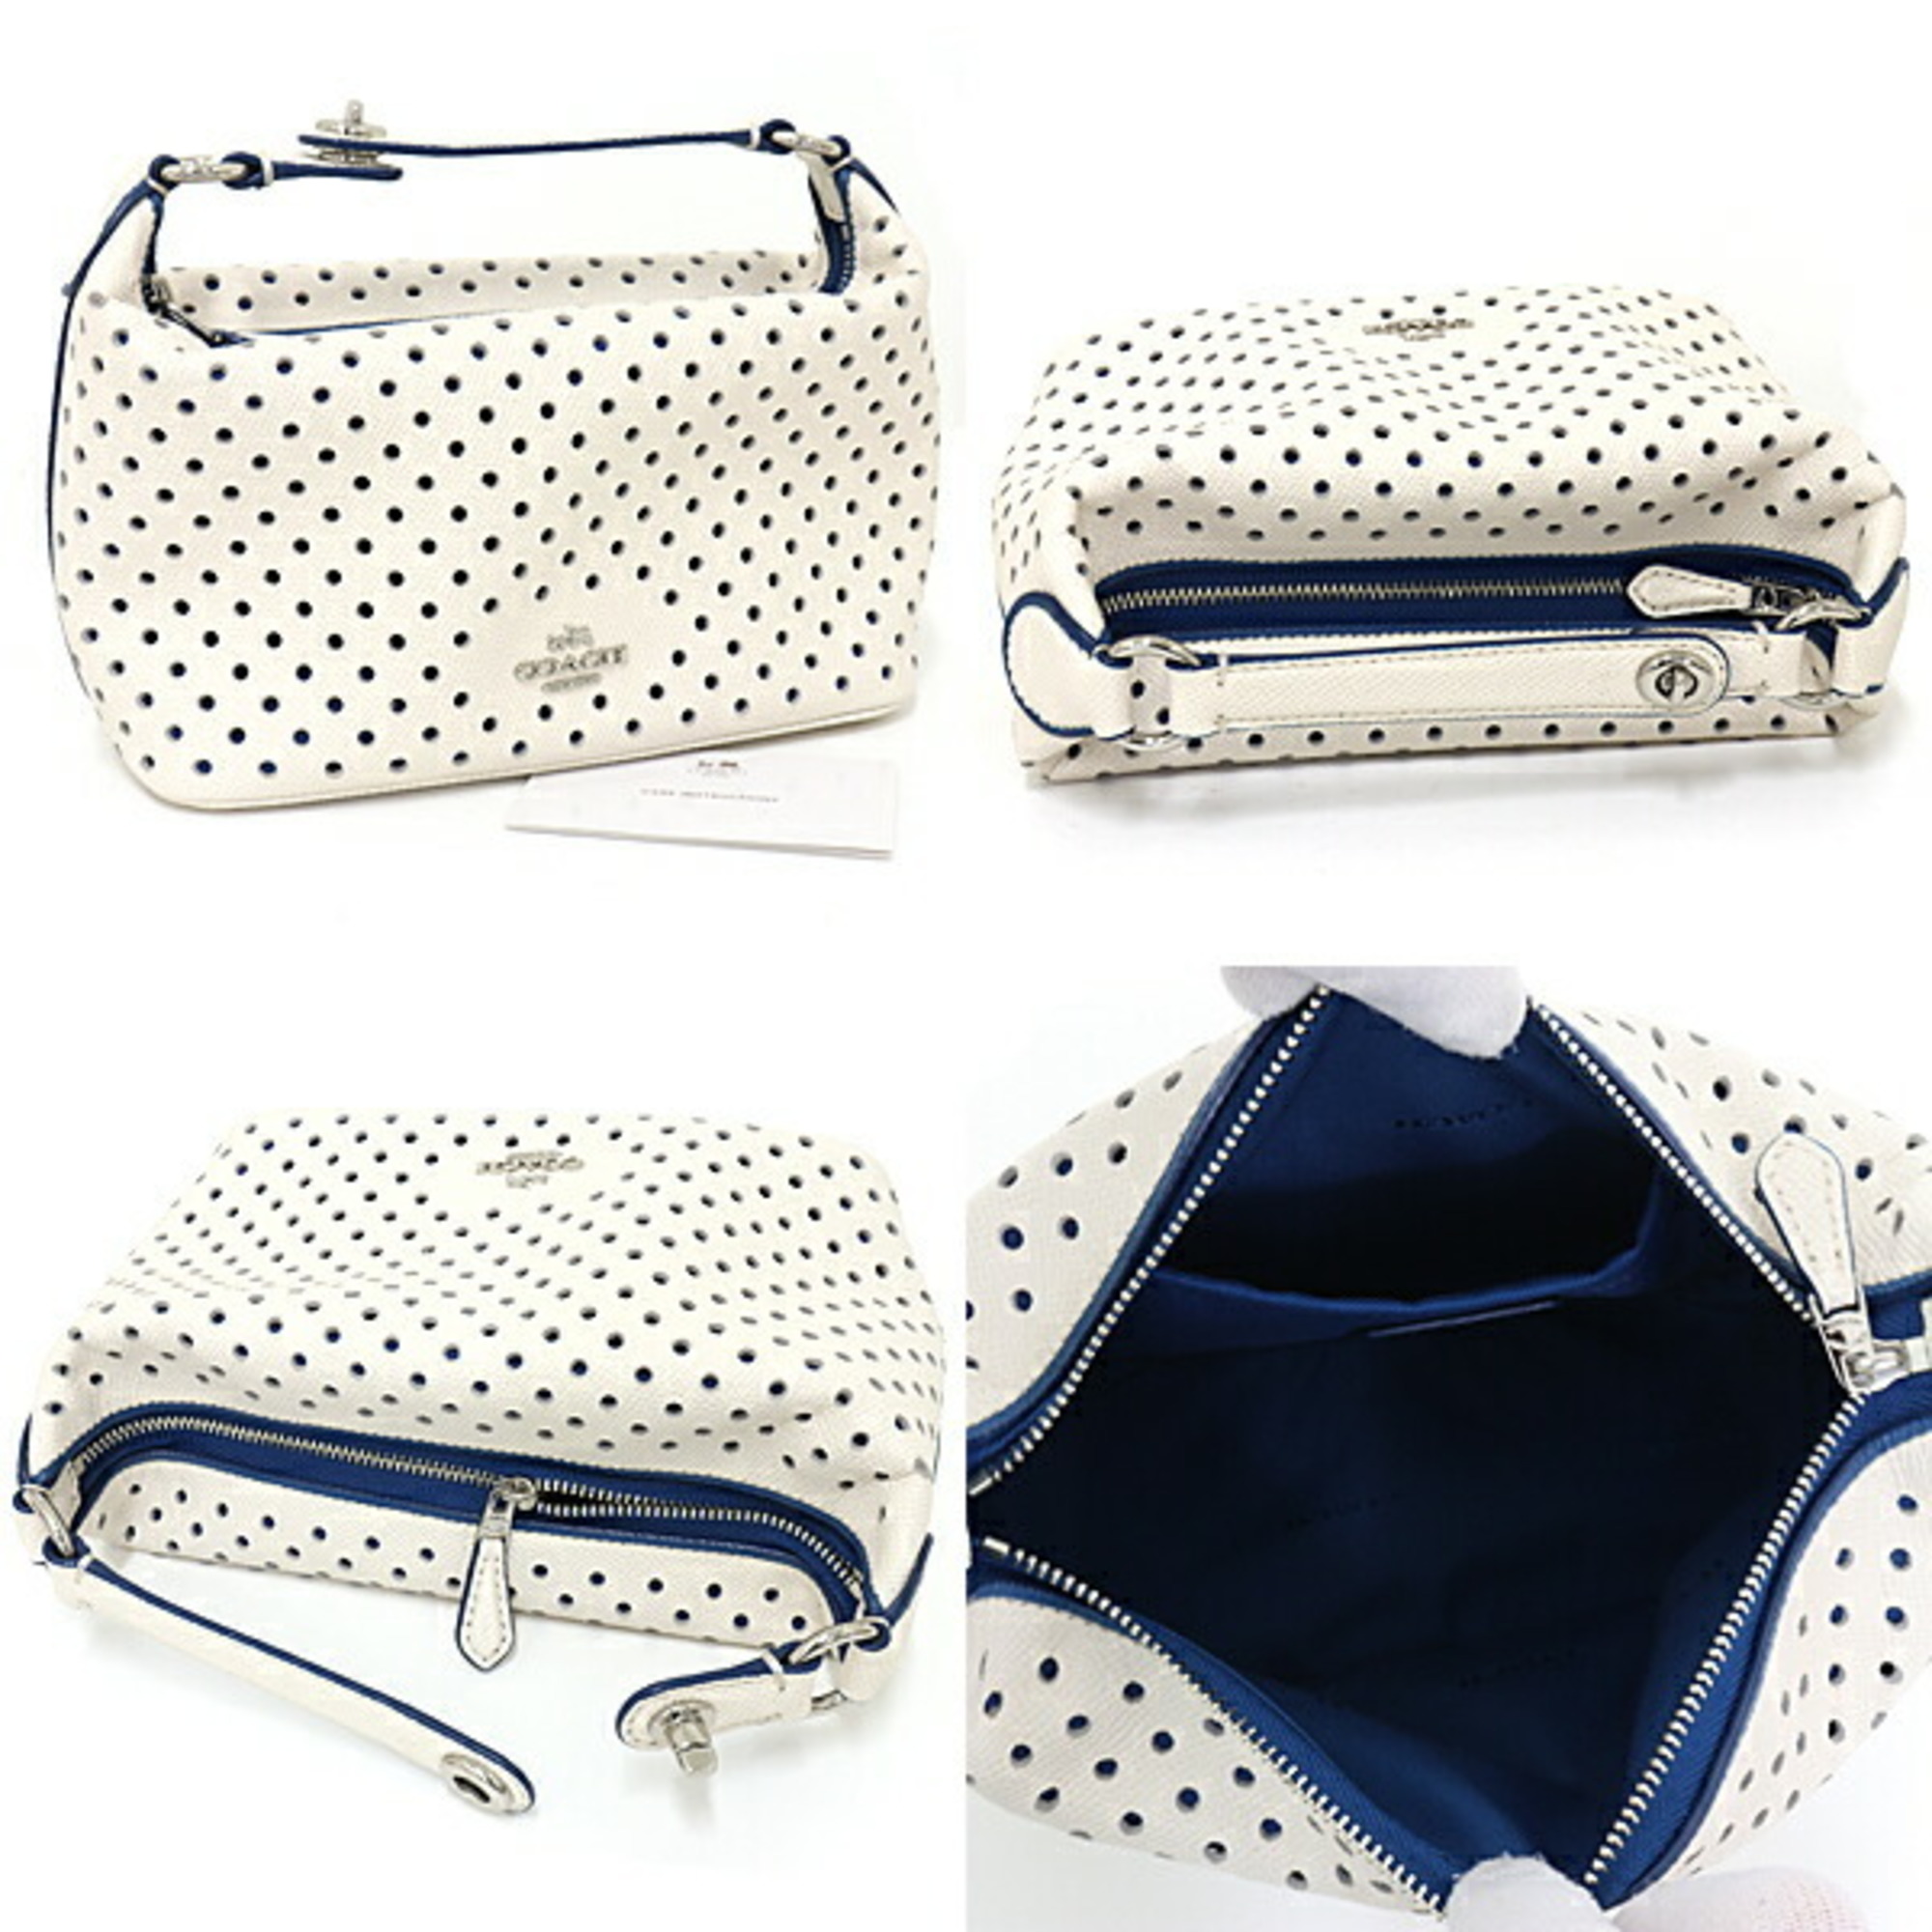 COACH coach perforated leather pochette pouch handbag punching 53215 ivory blue